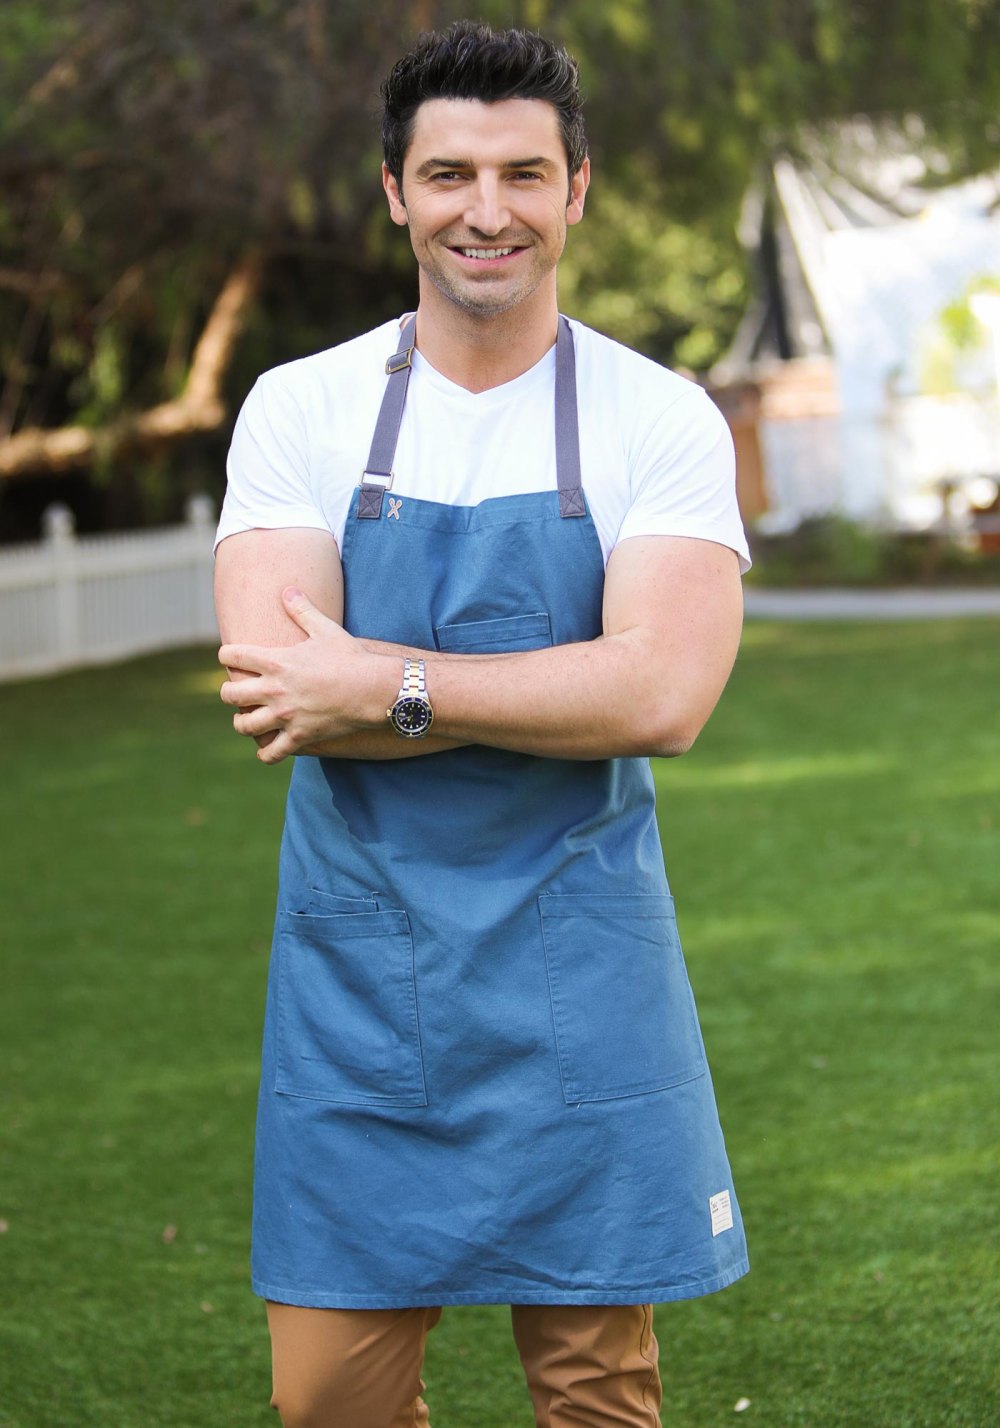 Chef Stuart O Keeffe Claims He Got Lame Excuse After Antoni Porowski Replaced Him on Queer Eye 001